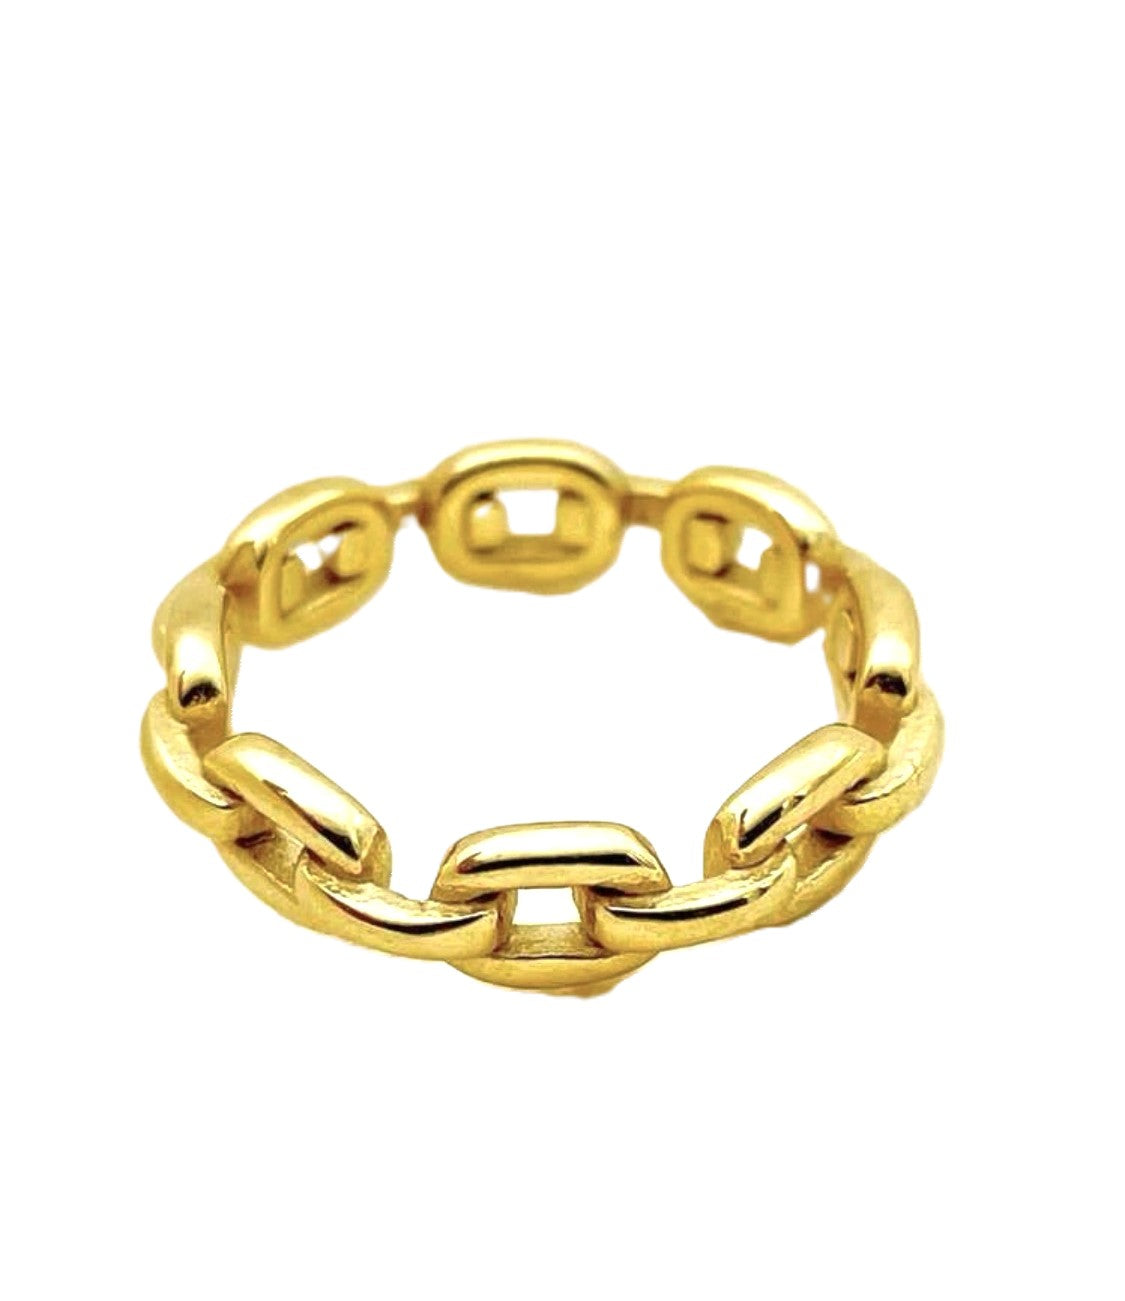 SALE - Chain Link Ring